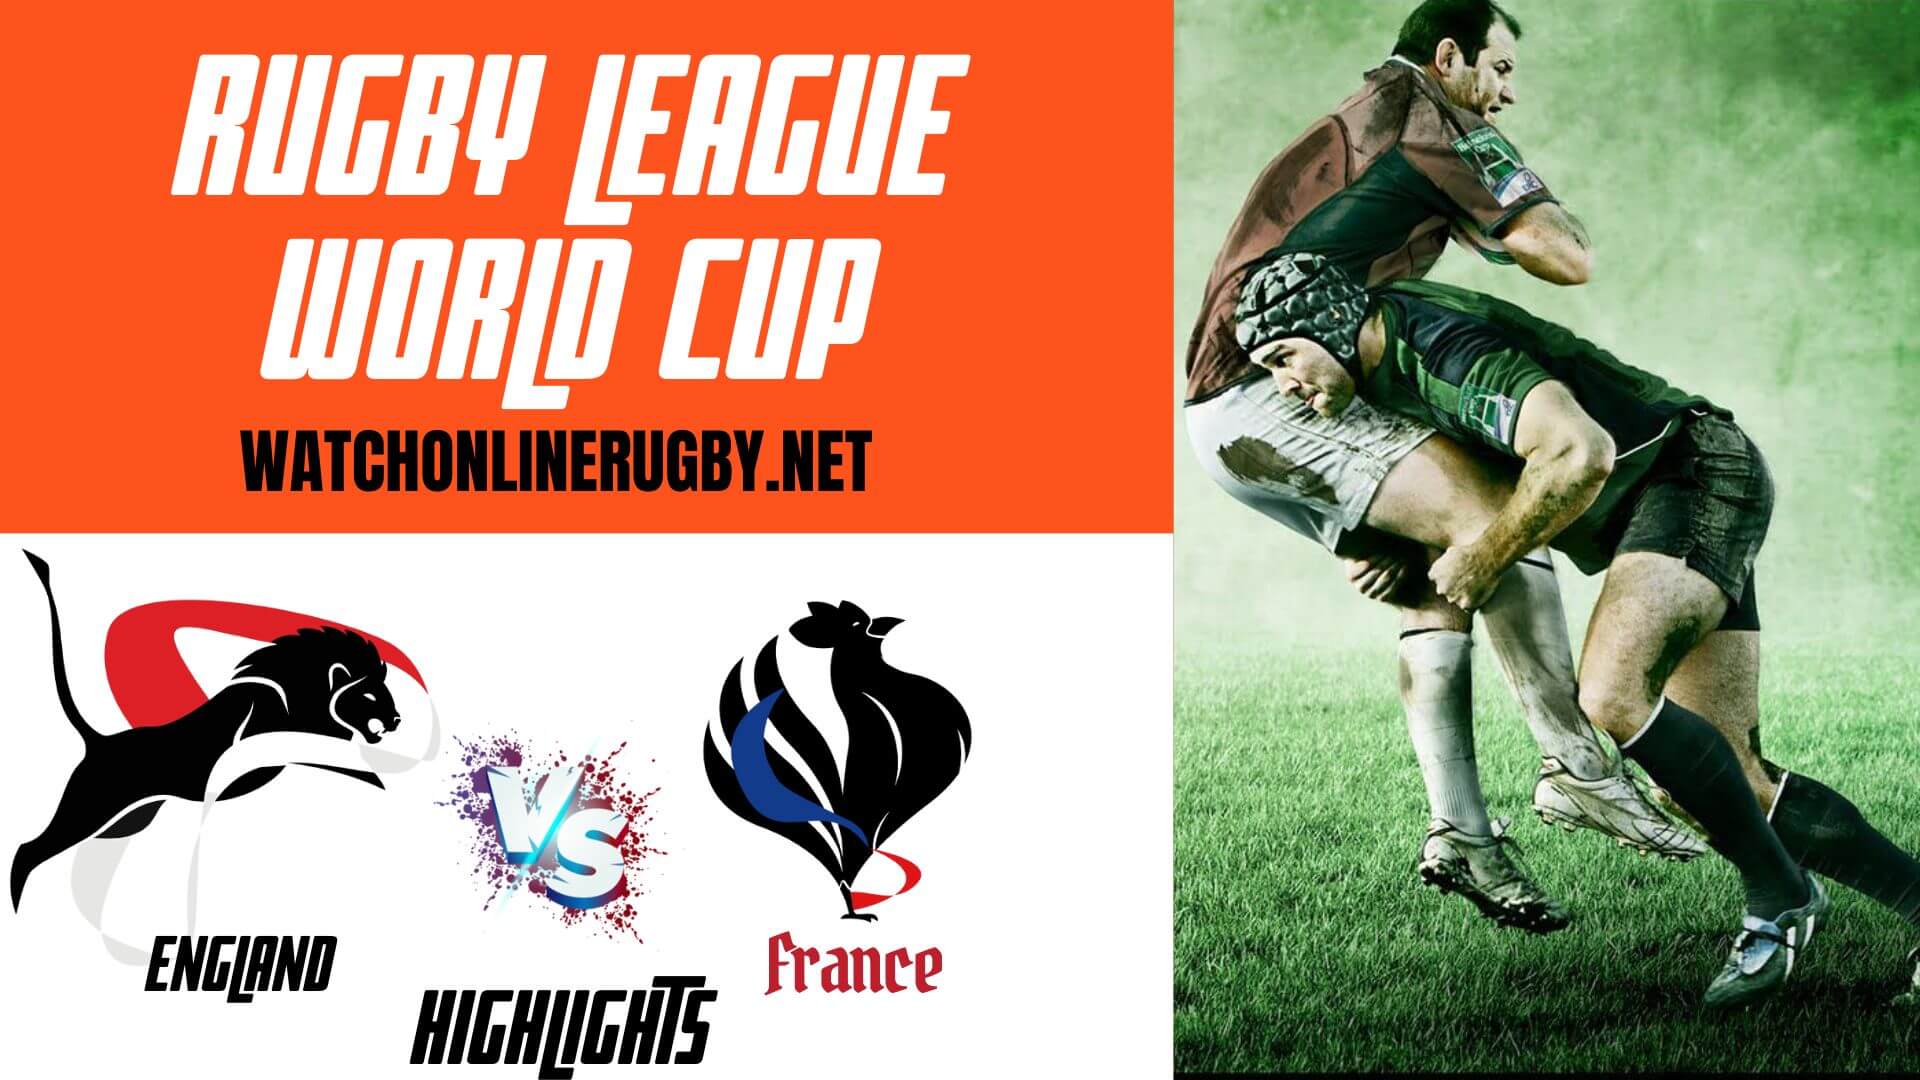 England Vs France Rugby League World Cup 2022 RD 2